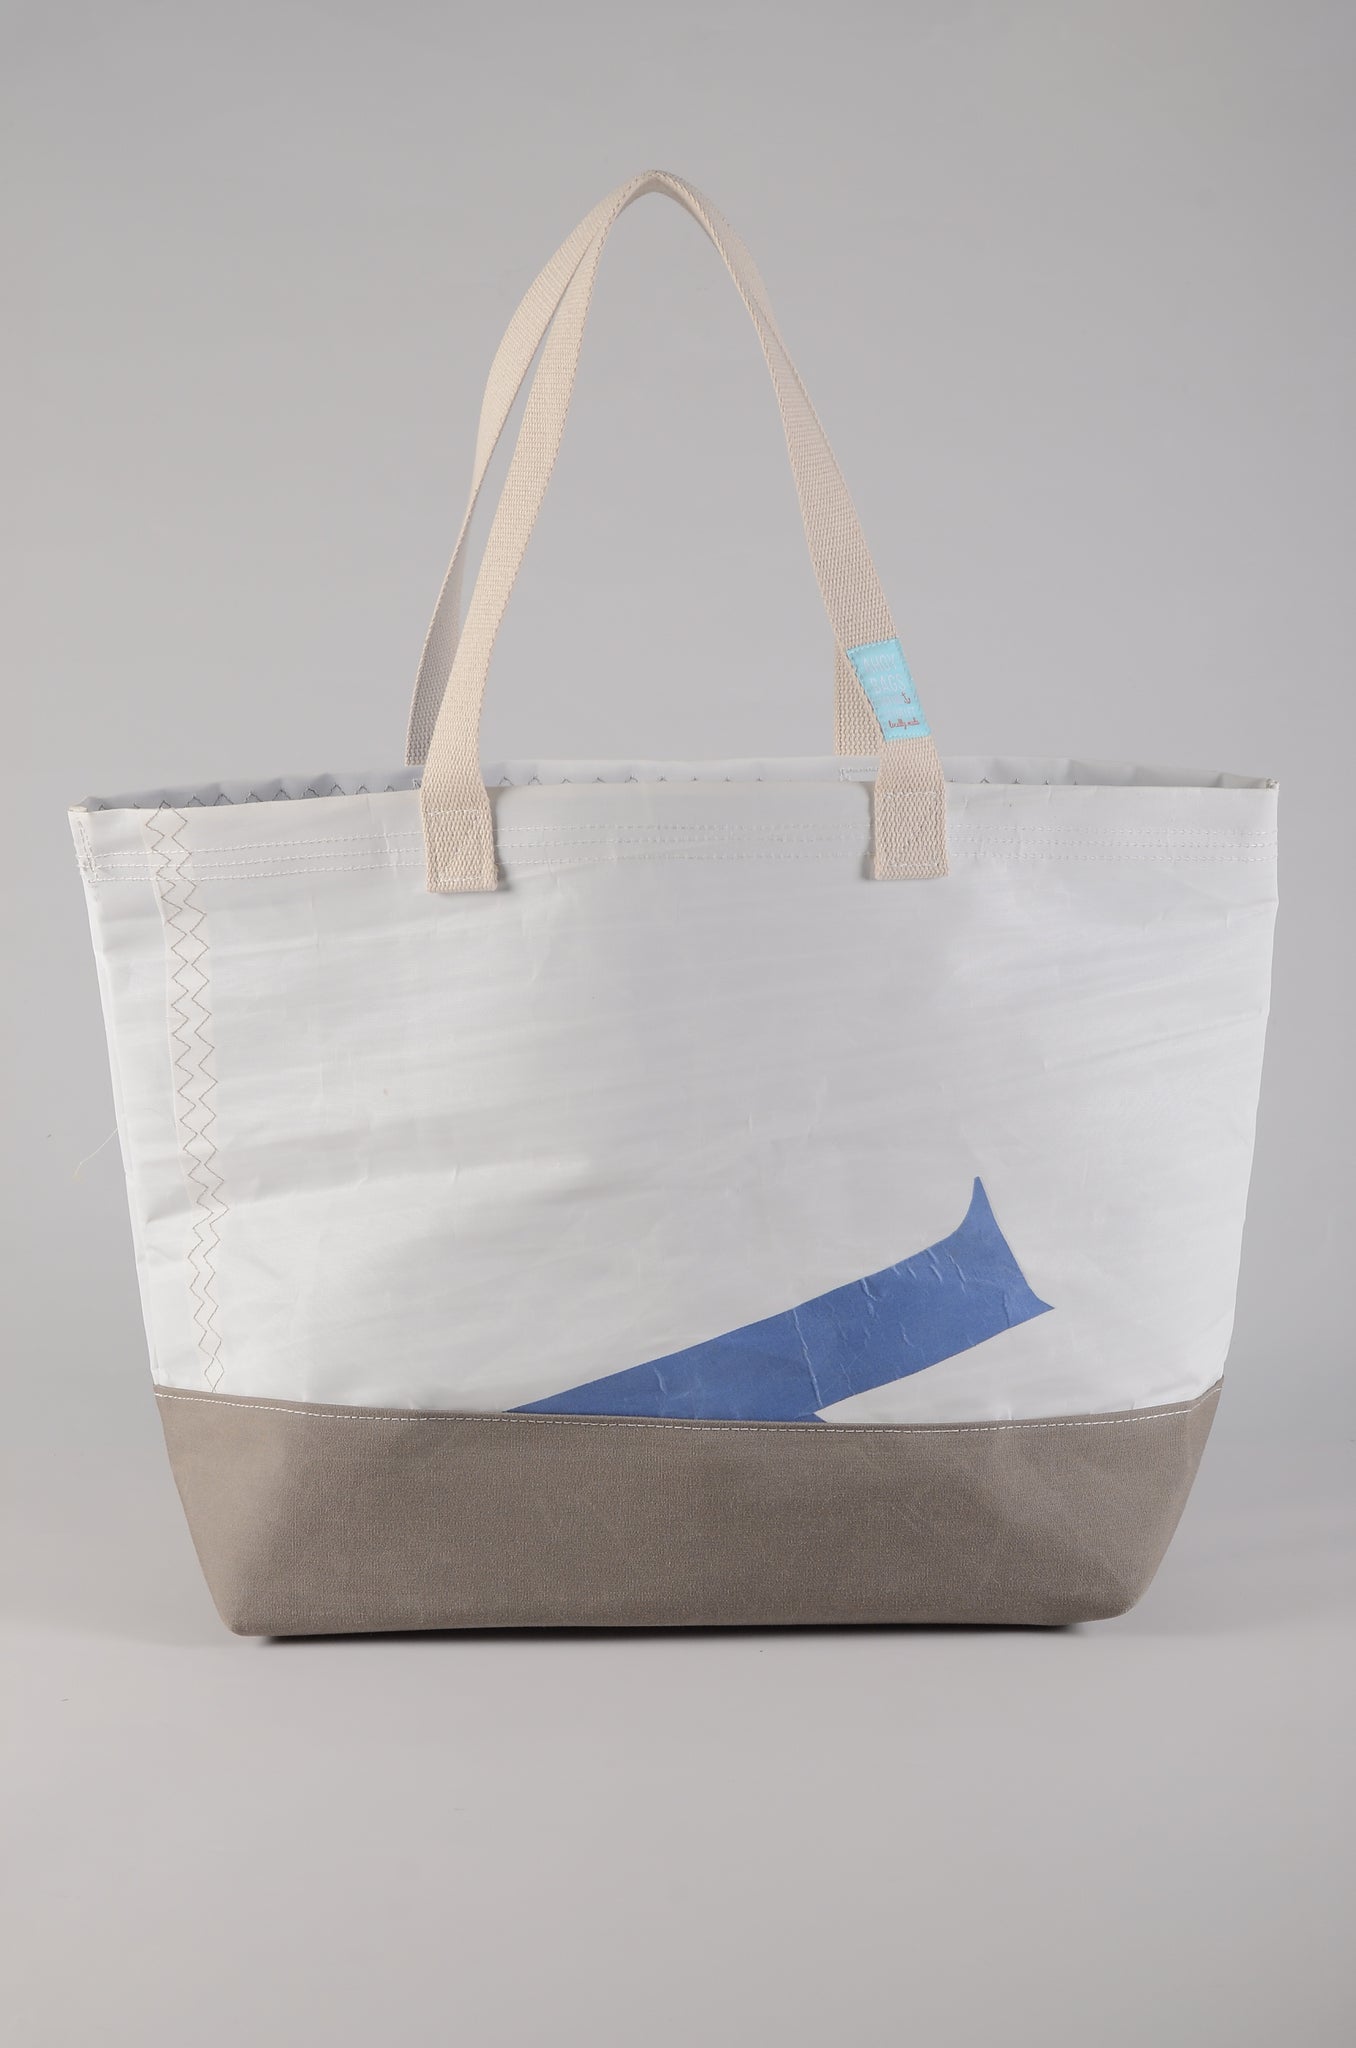 Beach Bag | Limited Edition | Large | Spinnaker